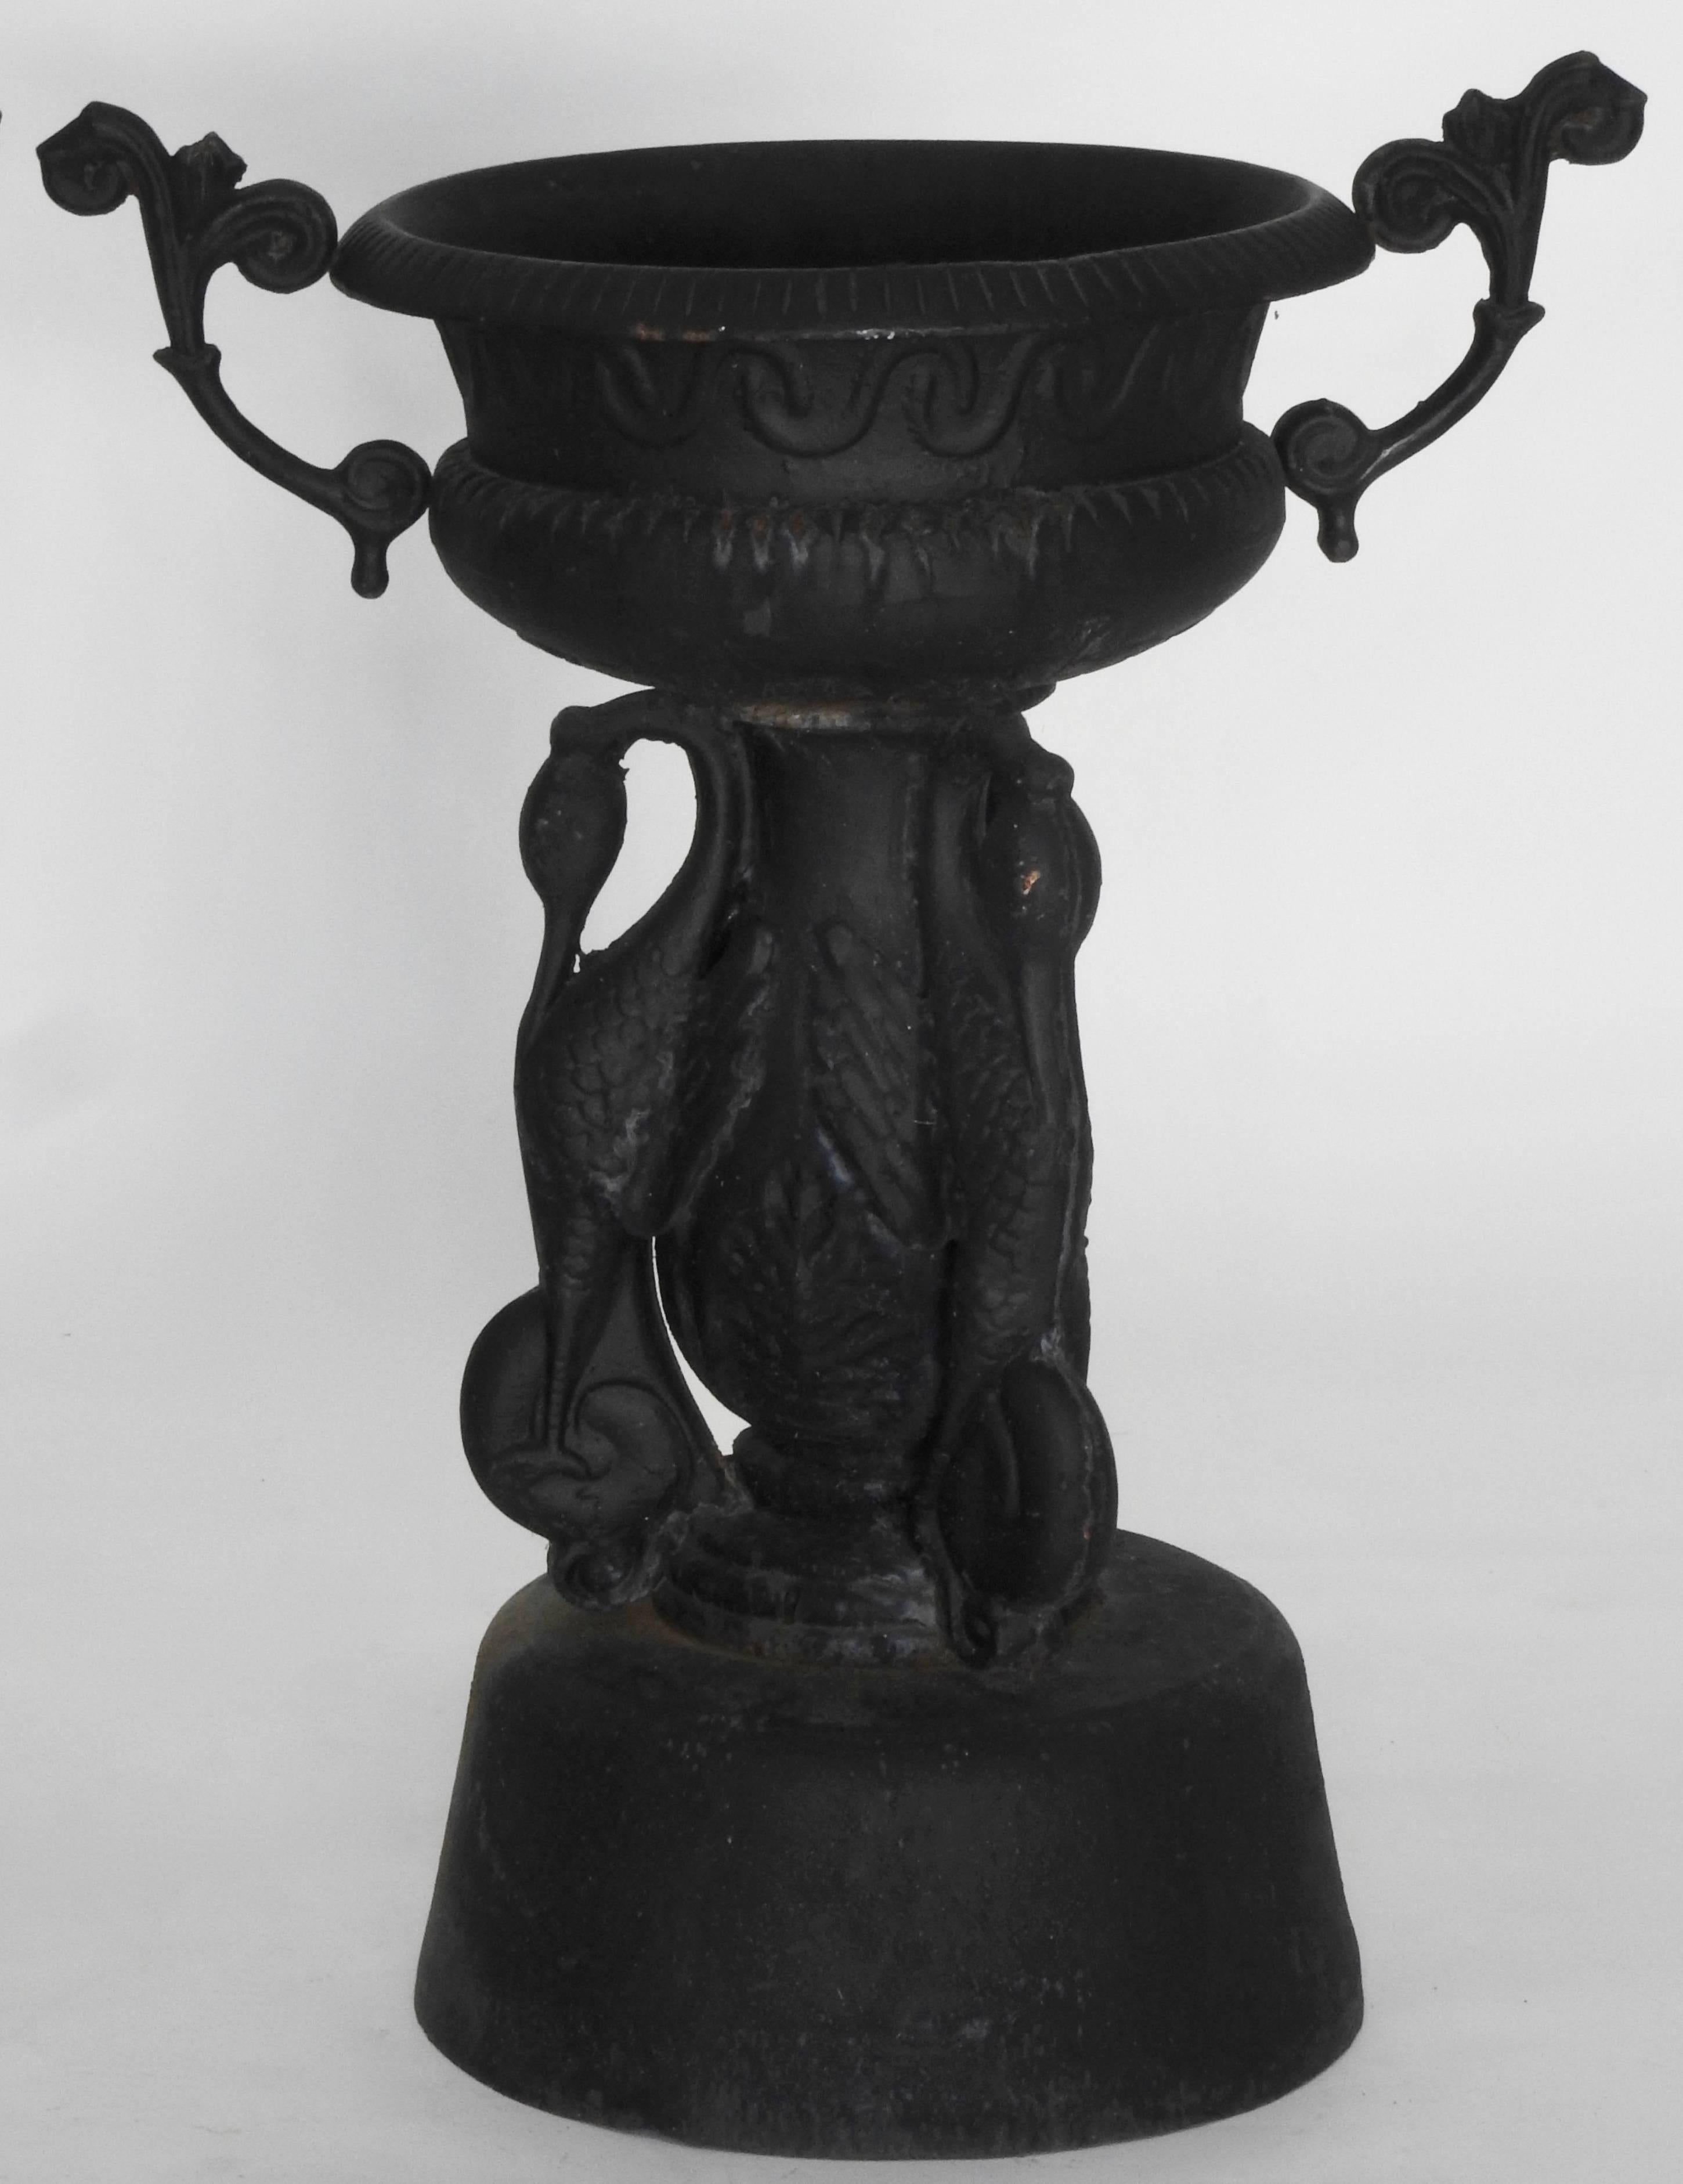 This is a spectacular pair of matching cast iron garden urns featuring cranes and ornate handles. They rise on a round riser followed by the cranes that rise with feather details and the rounding of the neck. The vessels sit atop the cranes with a